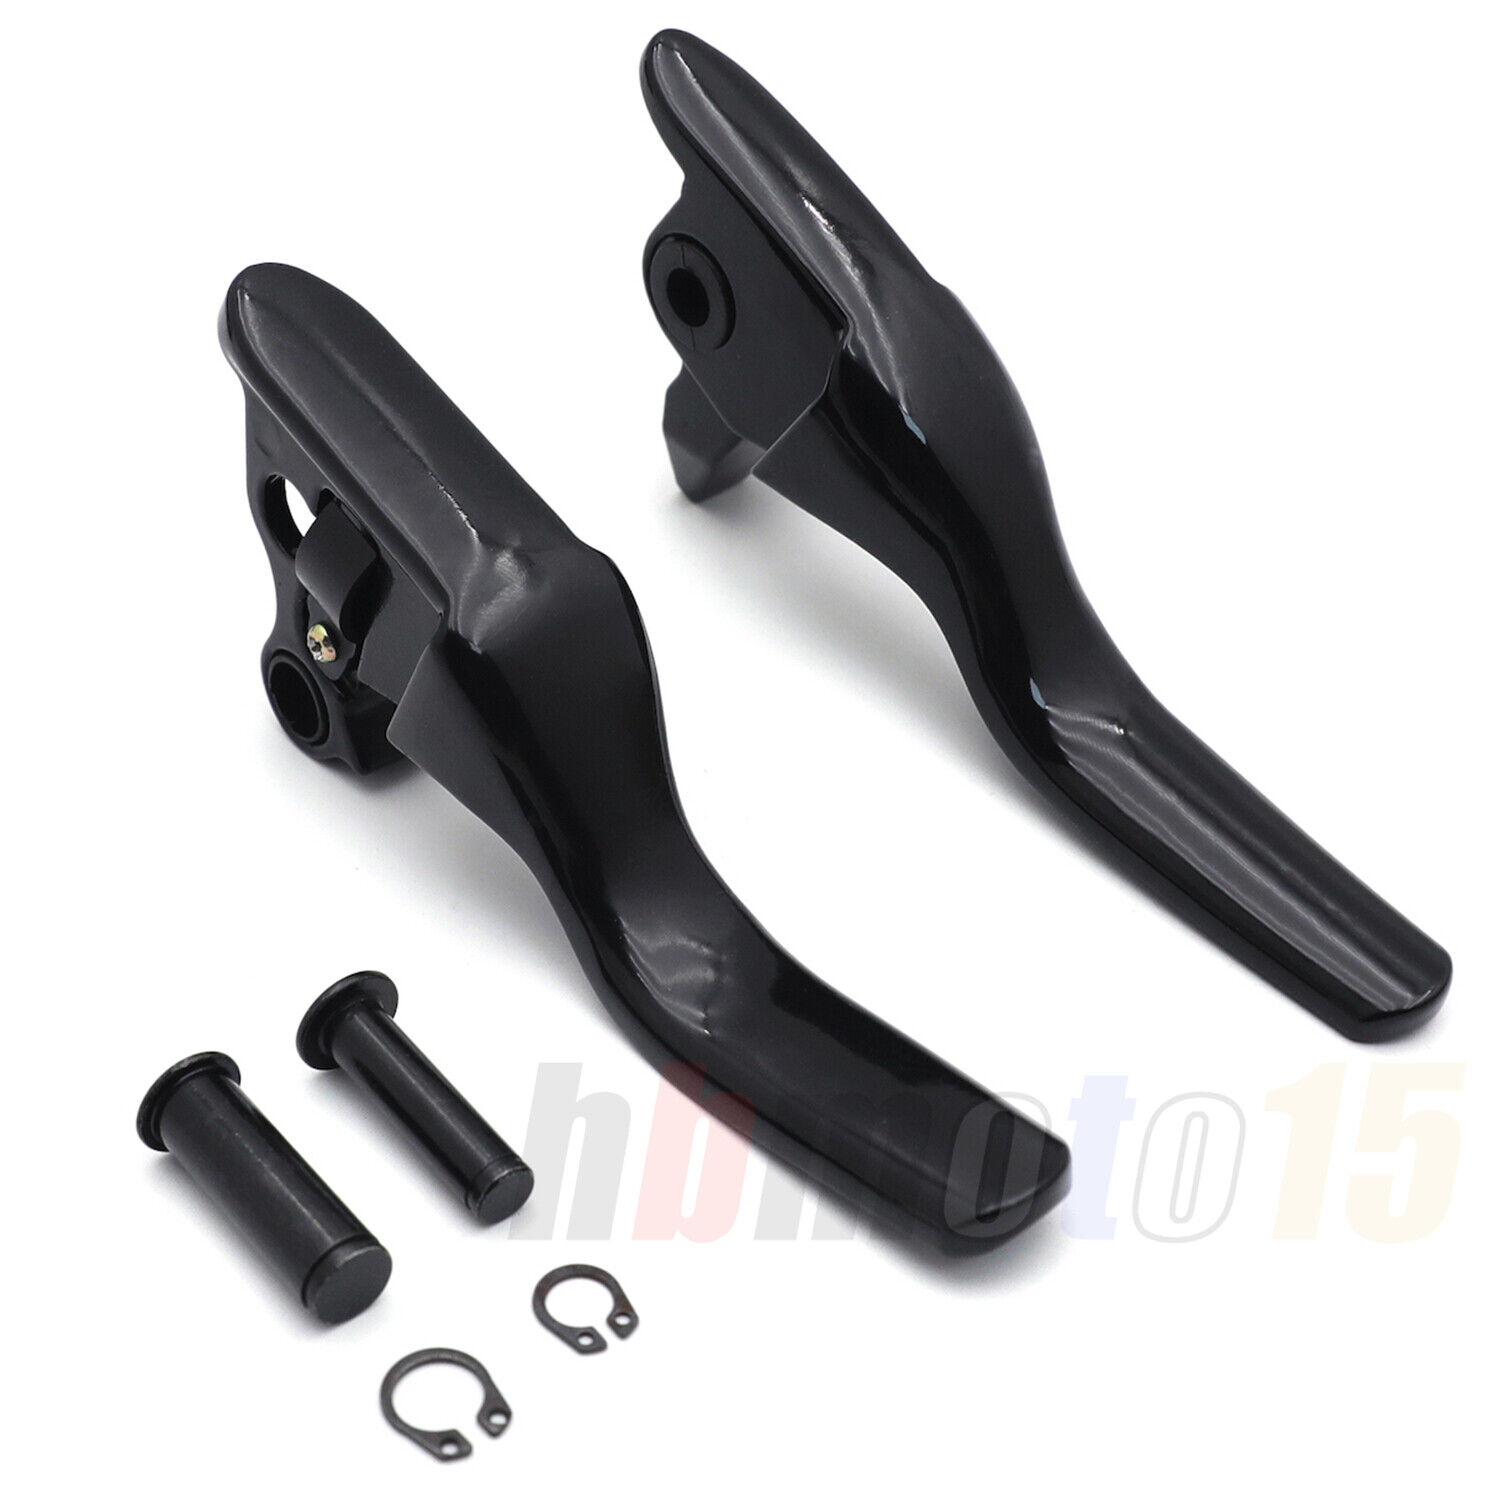 Black Shorty Brake Clutch Lever Glossy Smooth For Harley 2008-2013 Touring Trike